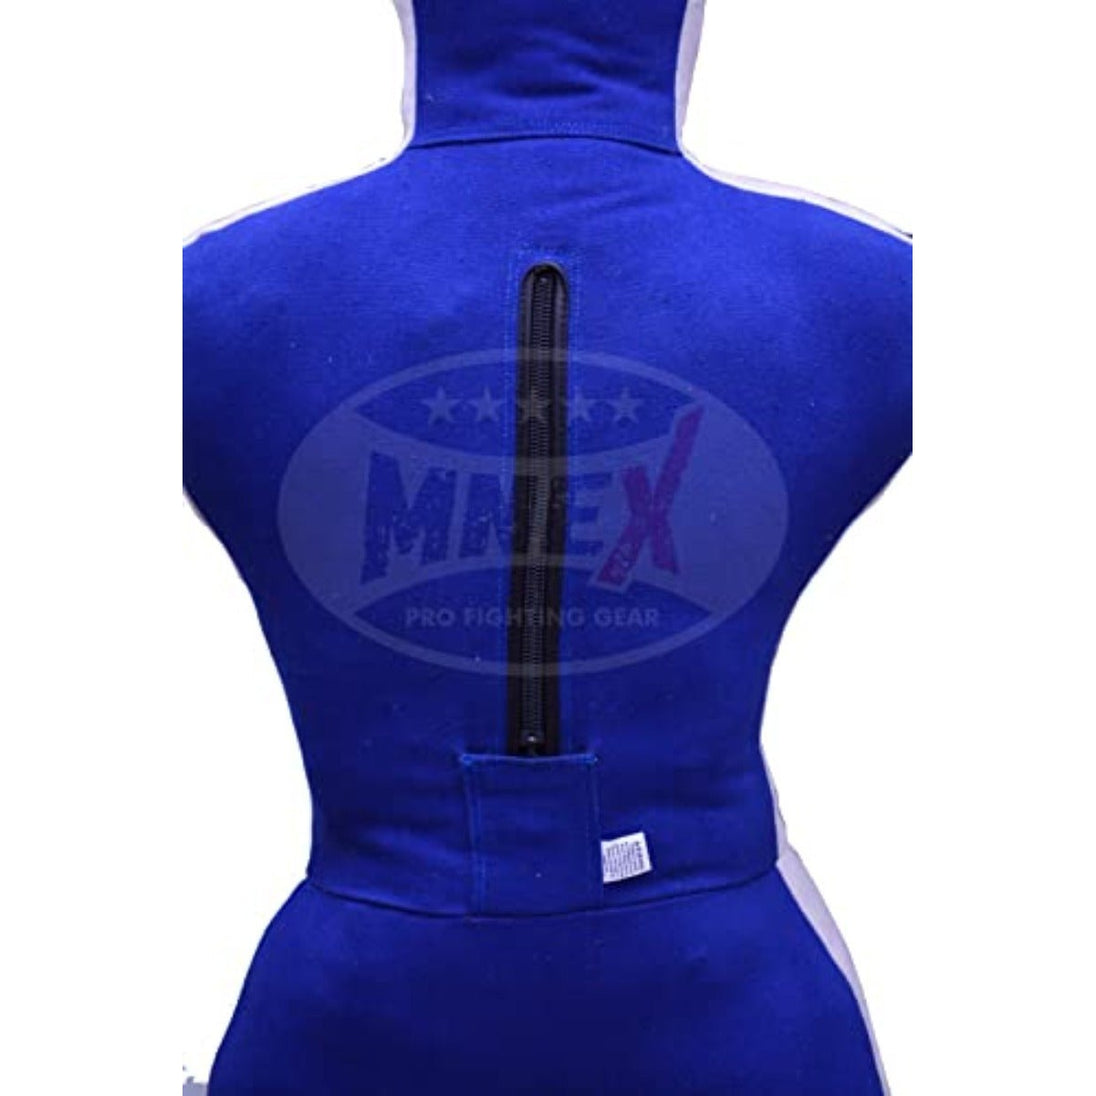 MNEX Pro Fighting Wrestling Dummy Grappling Dummies - 5ft/60 inches 6ft/72 inches Jujitsu BJJ Dummy MMA Dummies Judo Karate Fighting Dummy Un - Filled - Black 6ft / 72" - MNEX PRO FIGHTING LIMITED